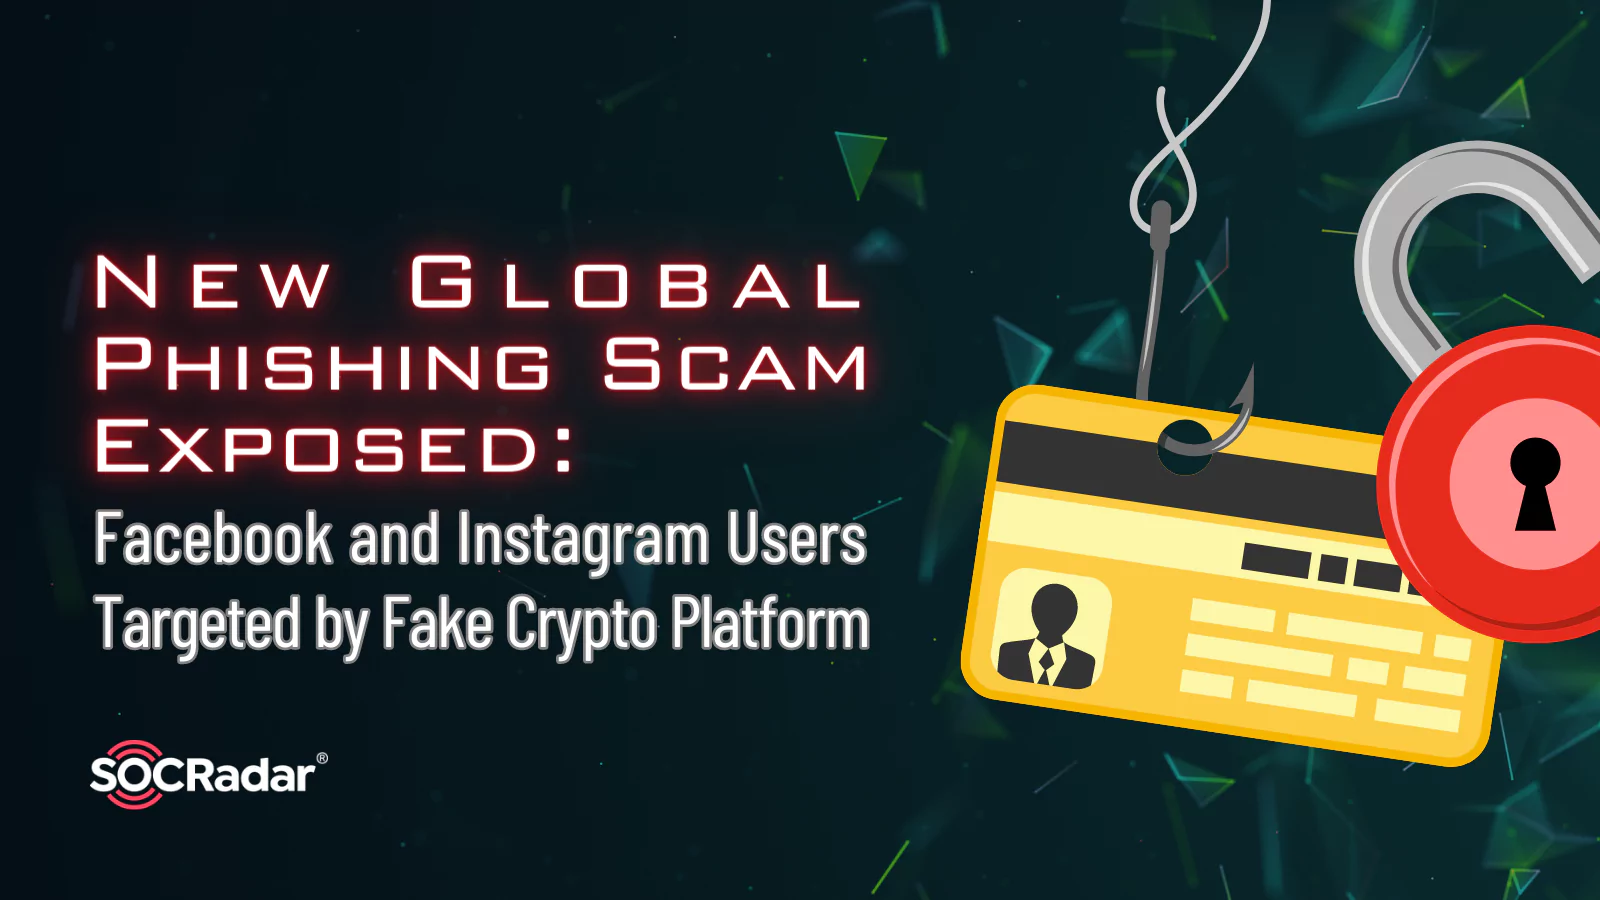 SOCRadar® Cyber Intelligence Inc. | New Global Phishing Scam Exposed: Facebook and Instagram Users Targeted by Fake Crypto Platform